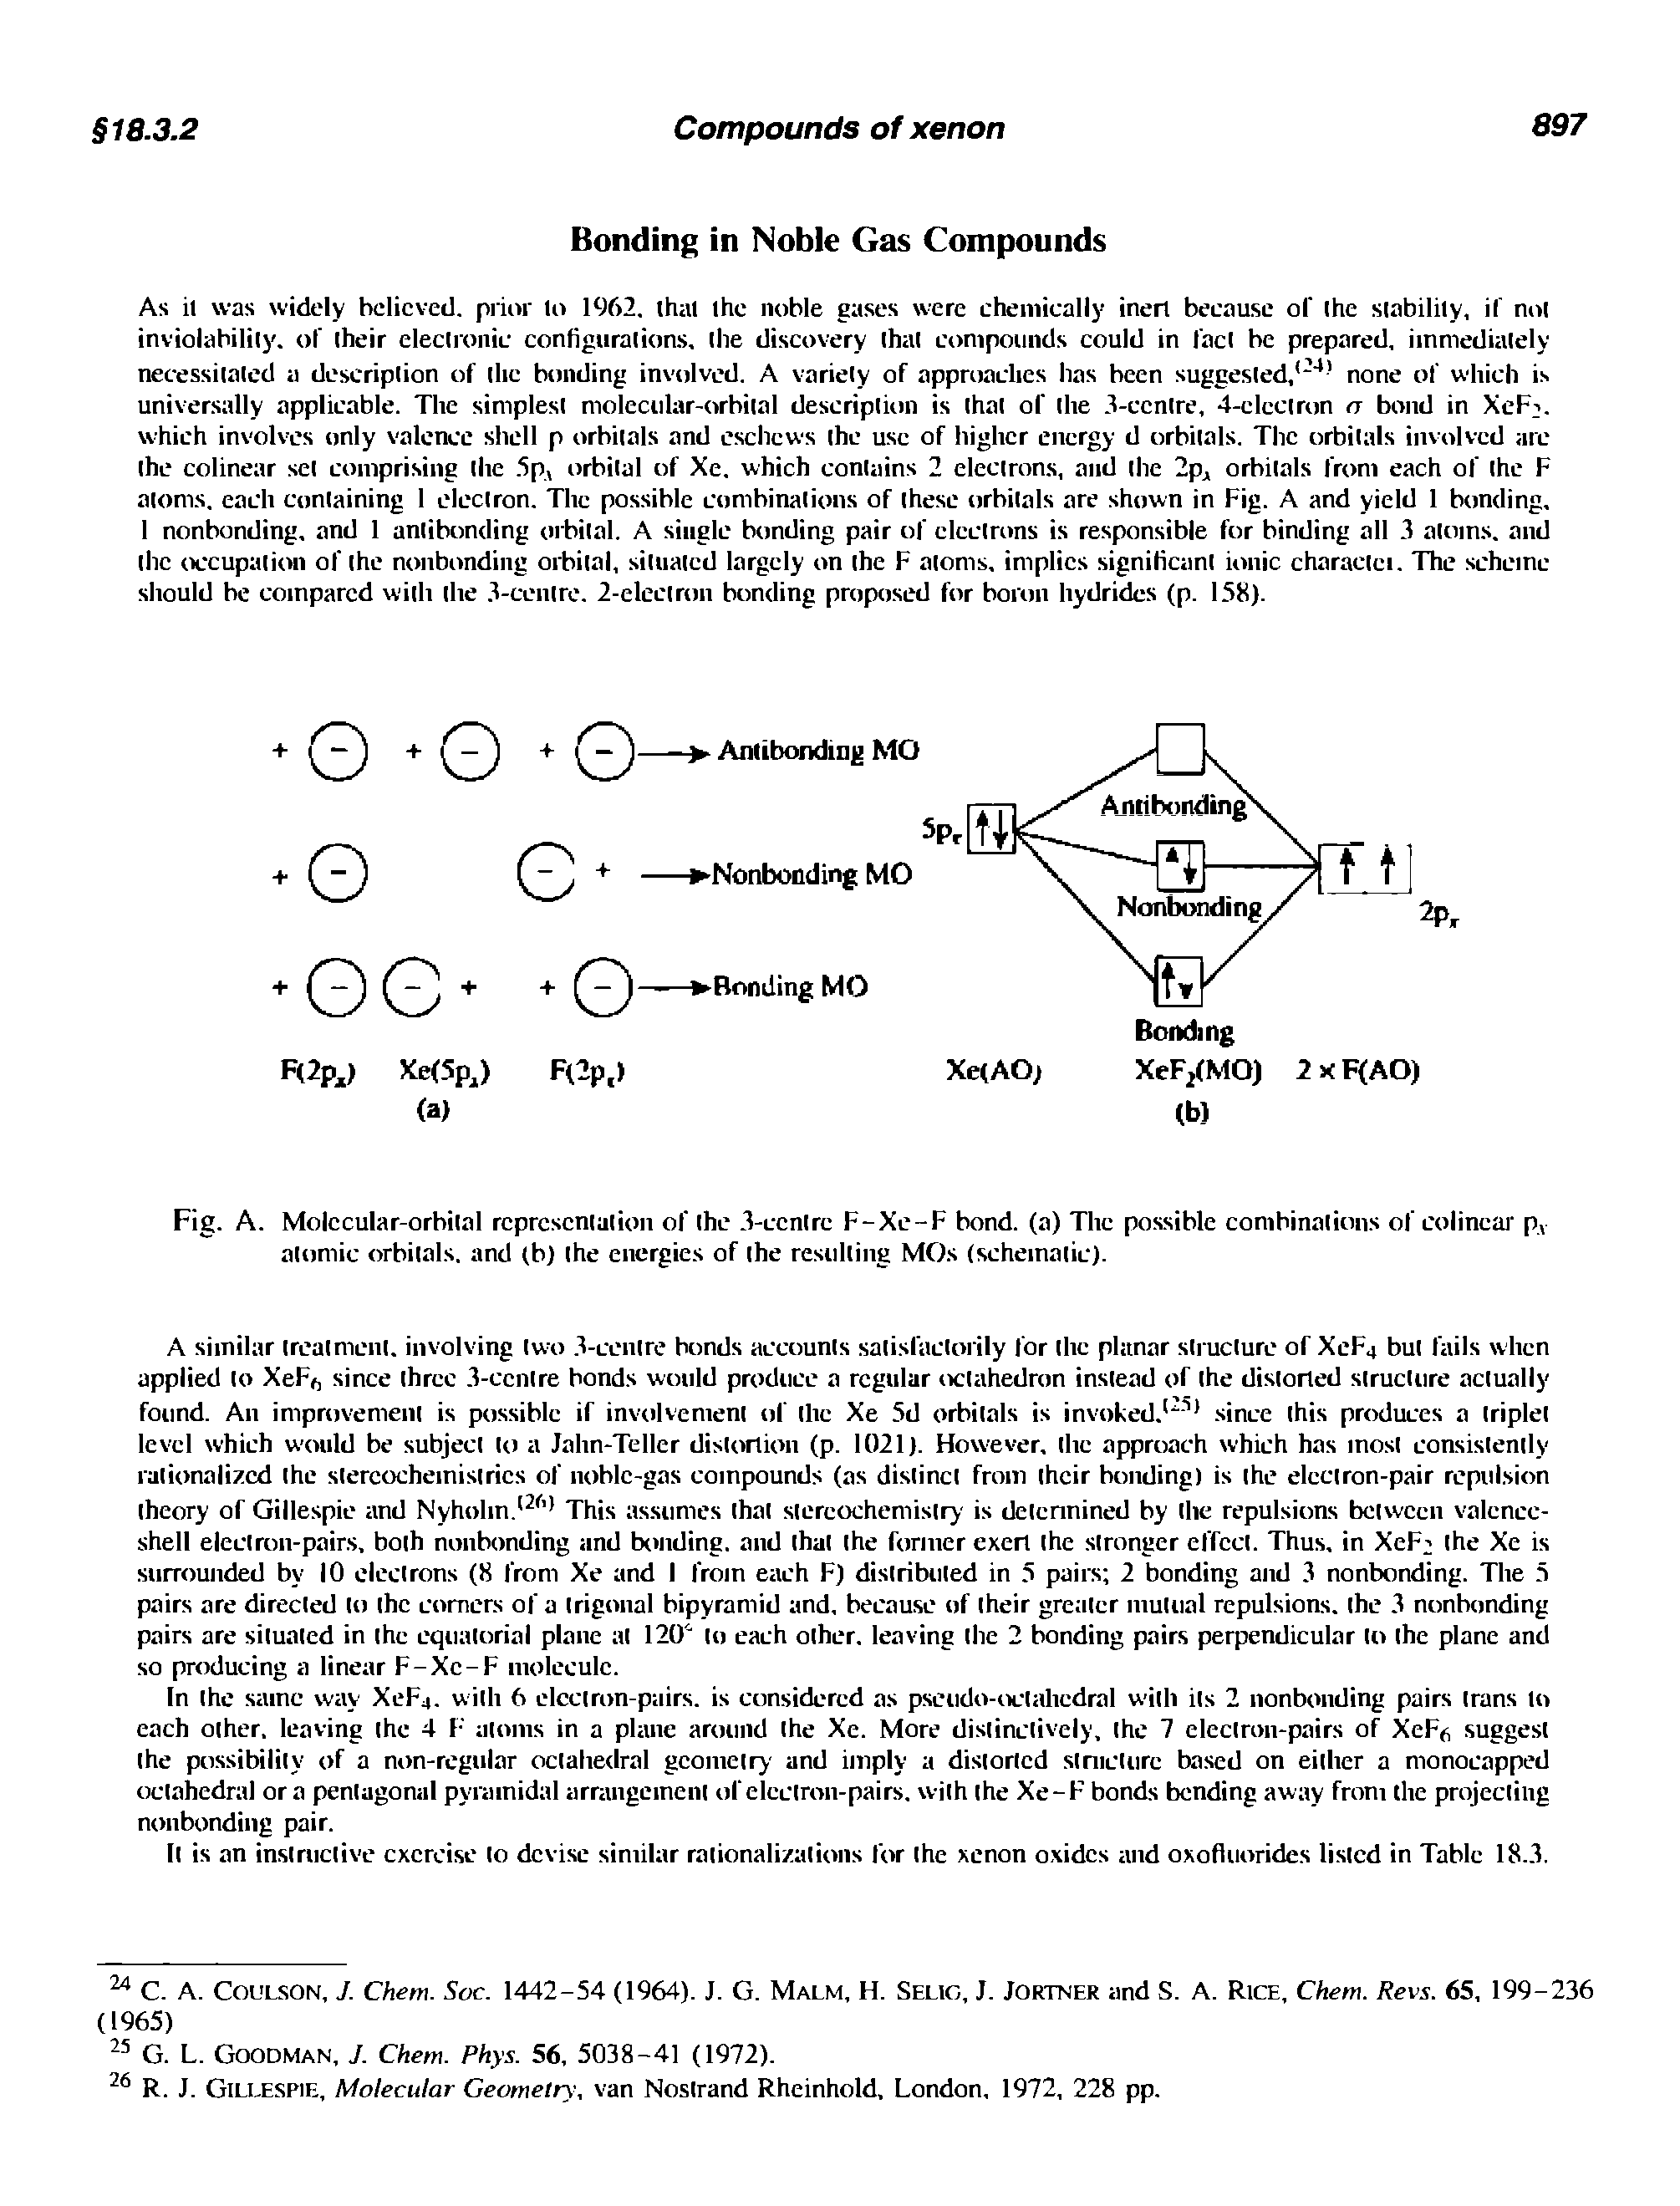 Fig. A. Molecular-orbital representation of the 1-centrc F-Xe-F bond, (a) The possible combinations of colinear p, atomic orbitals, and (b) the energies of the resulting MOs (schematic).